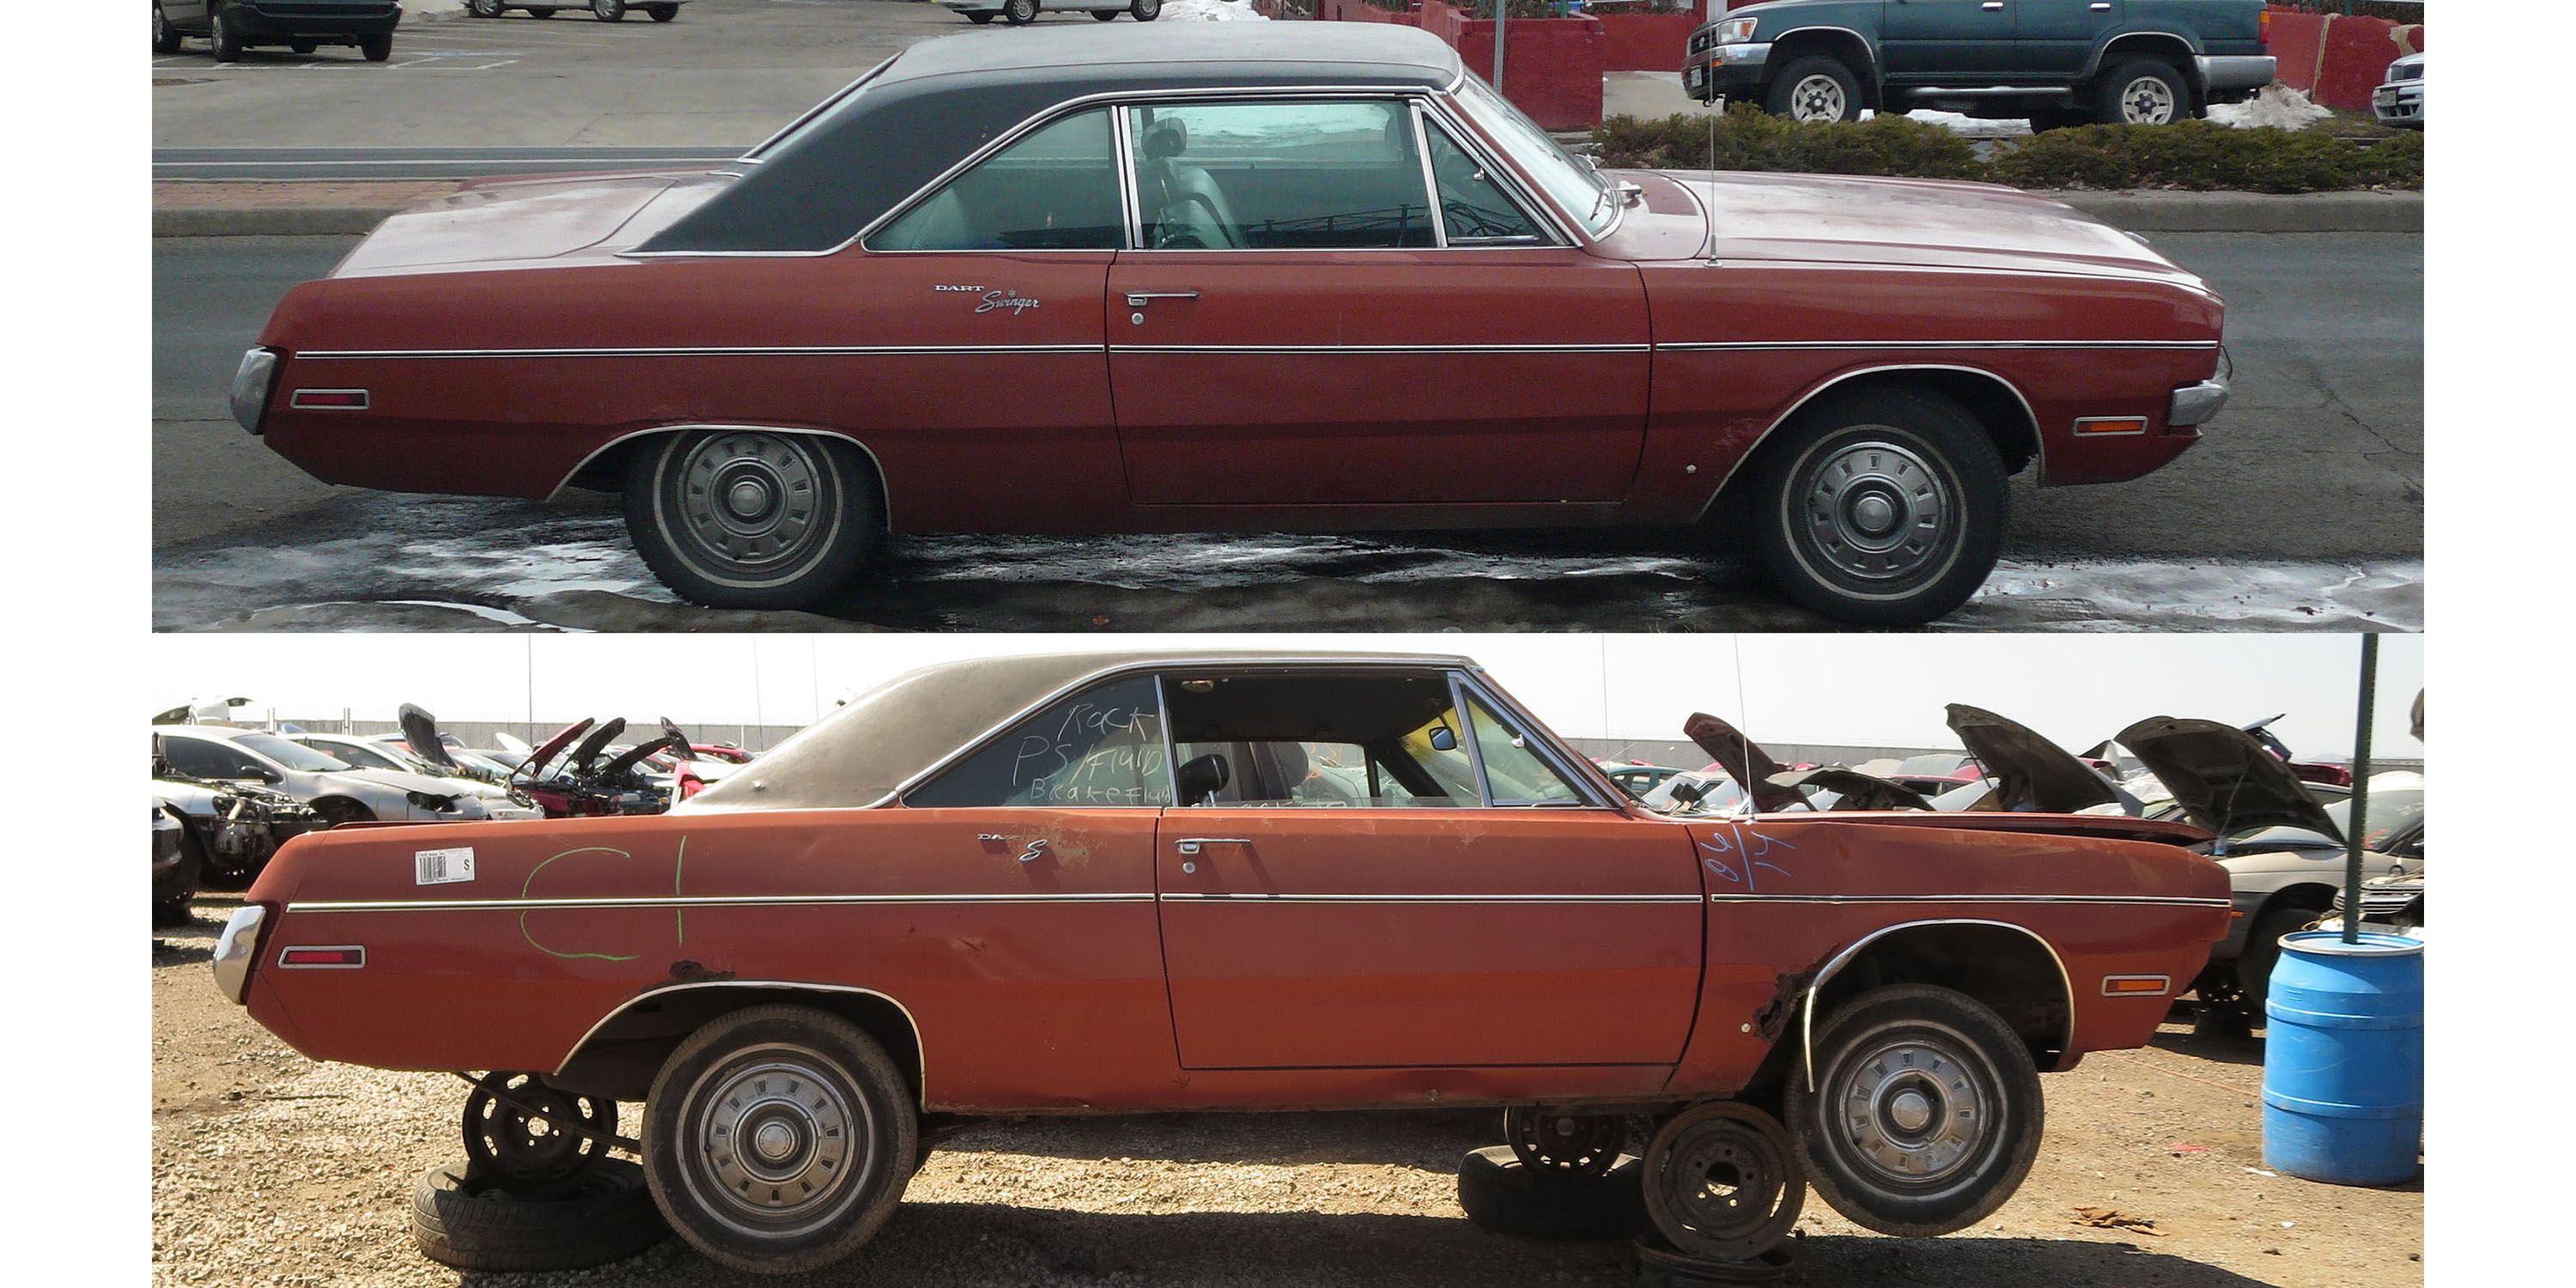 1970 Dodge Dart Swinger Goes From Street to Junkyard picture pic